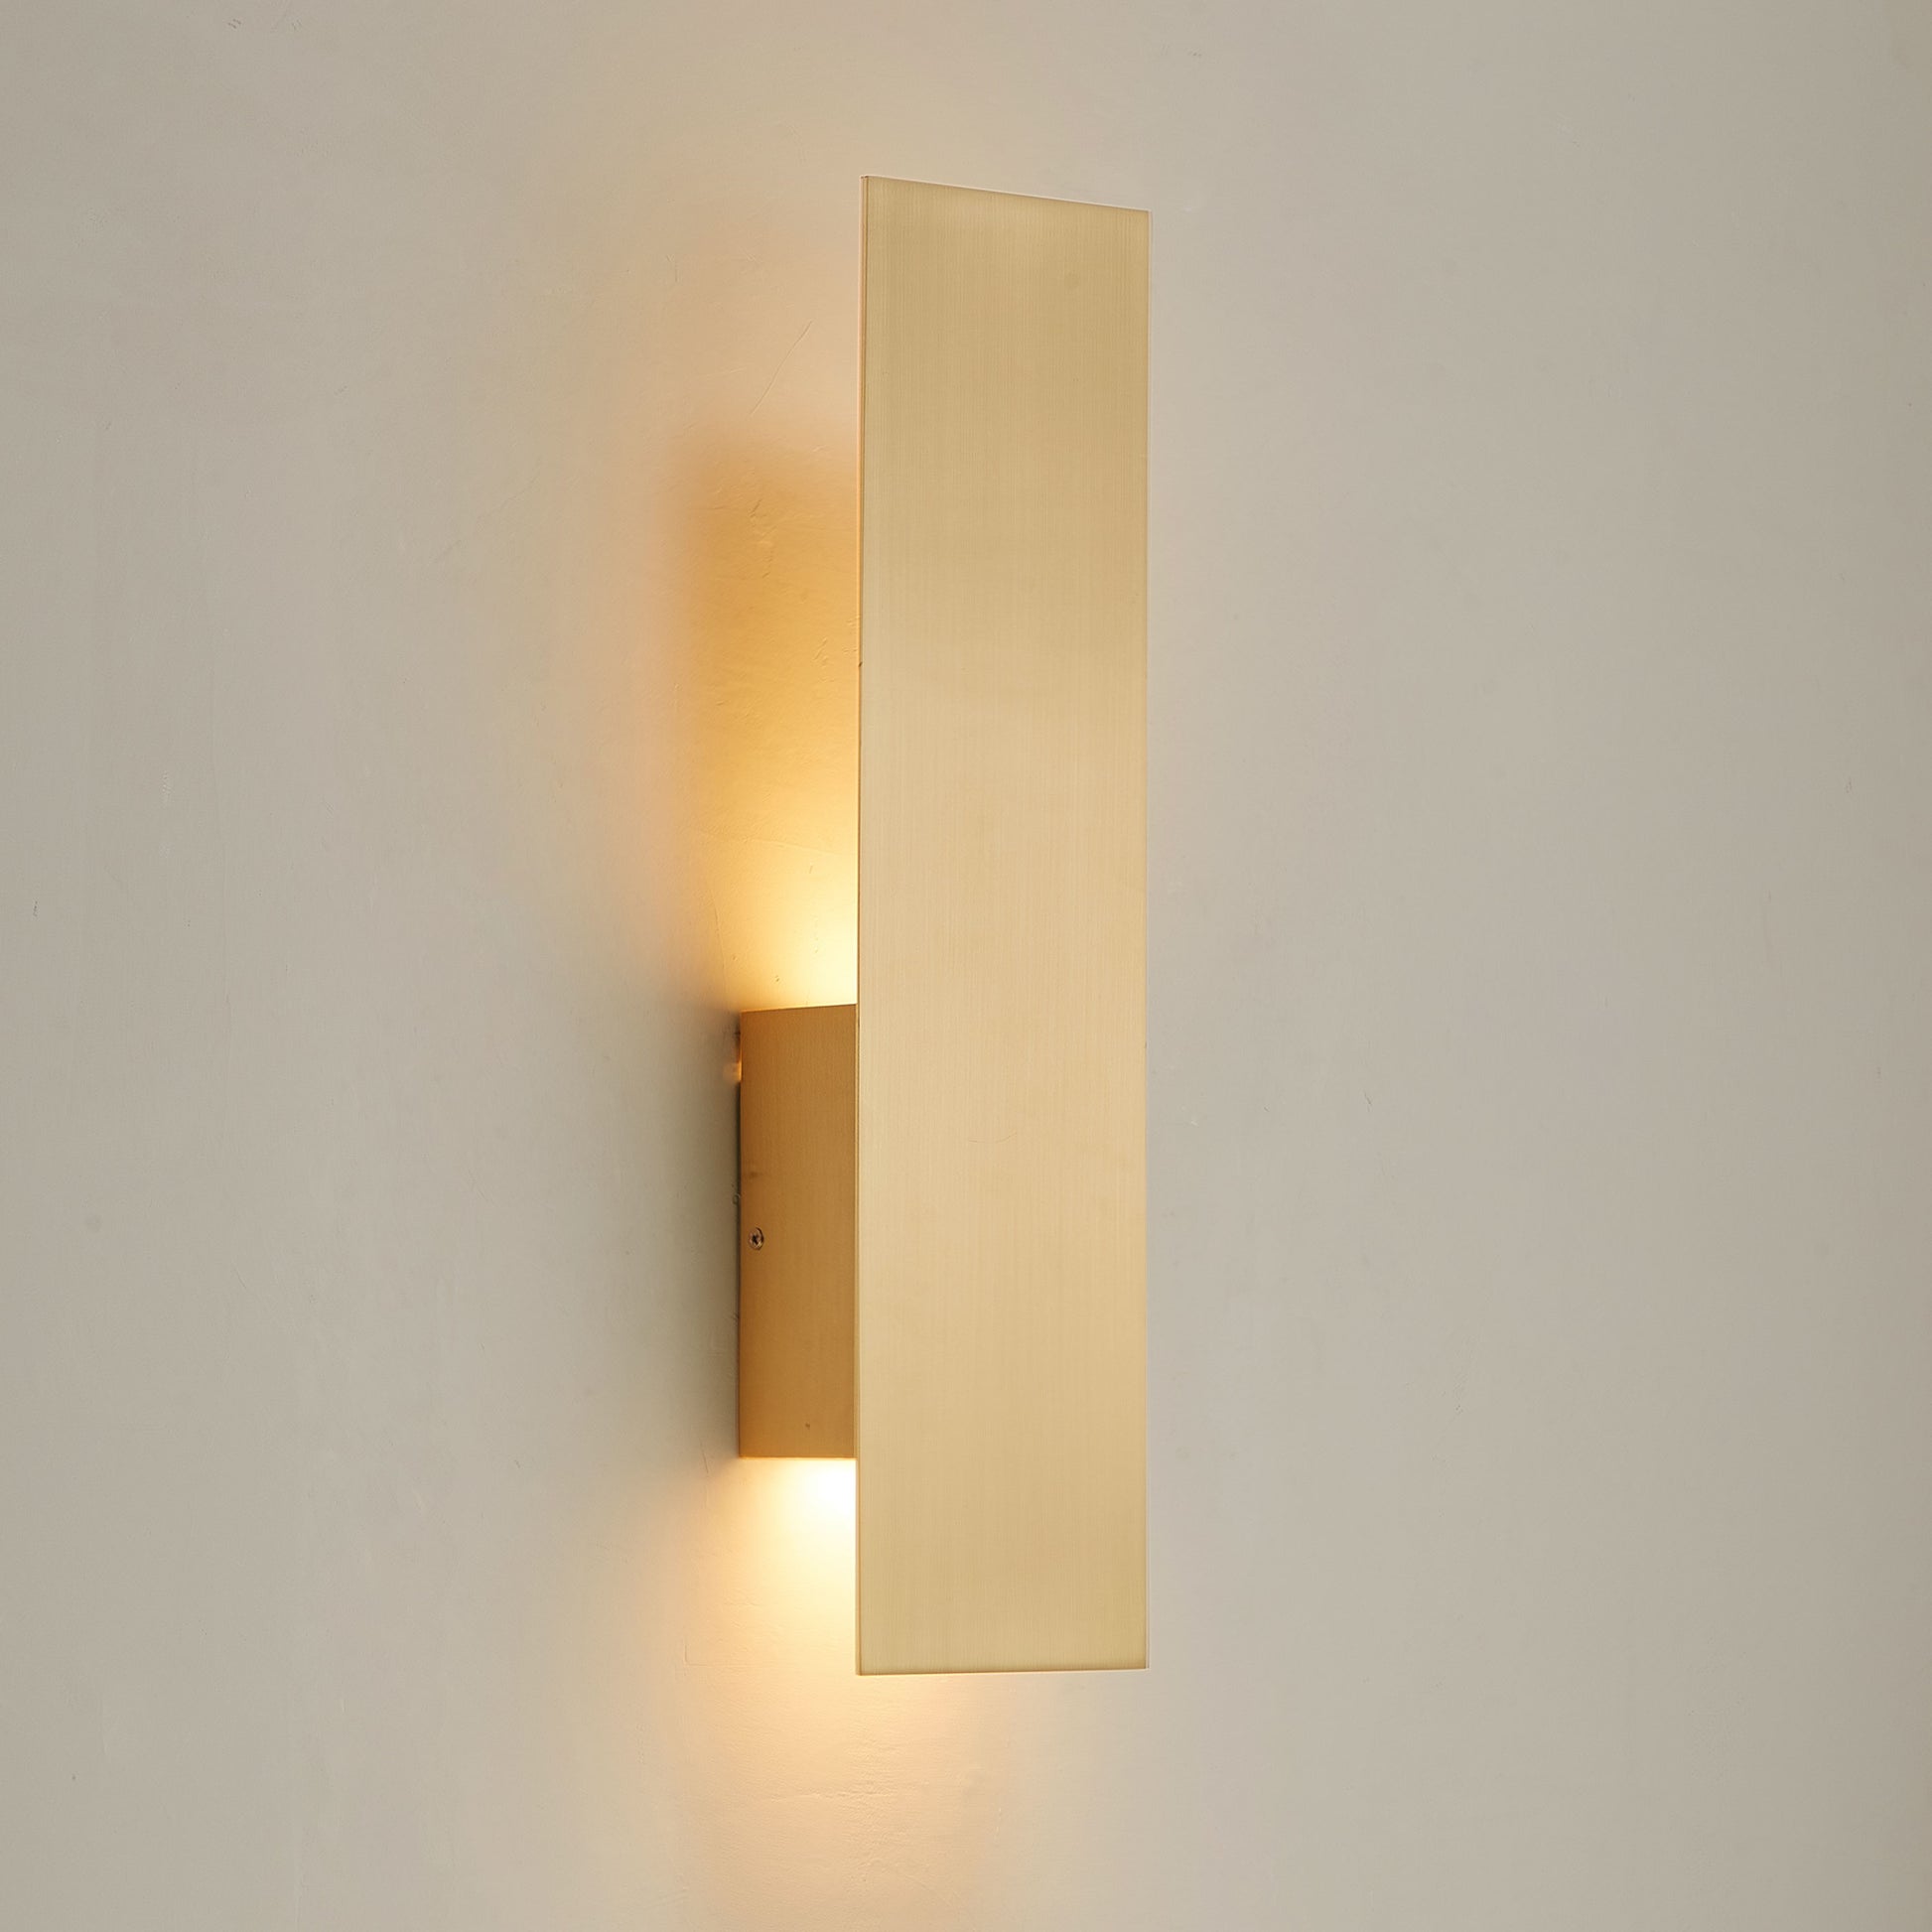 2-Lights, Decorative Wall Sconce with Frosted Glass Diffuser